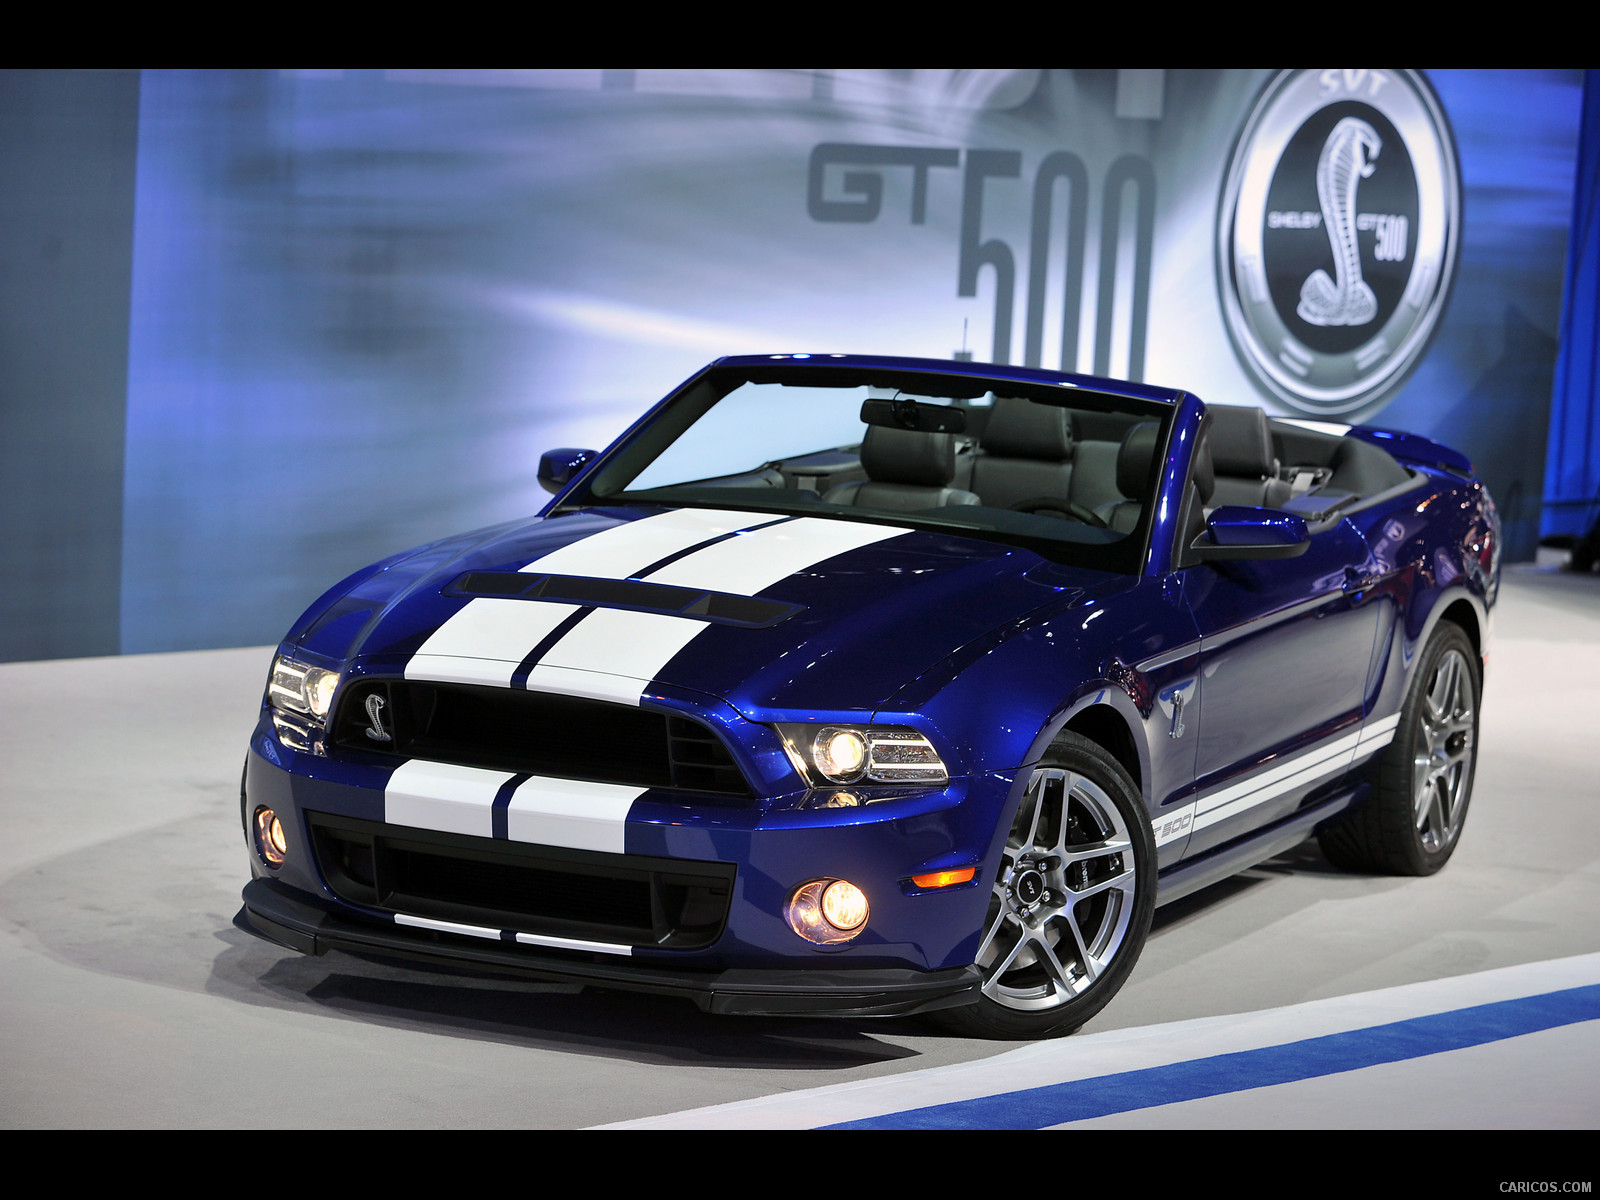 Ford Mustang Shelby Gt500 Wallpaper Image